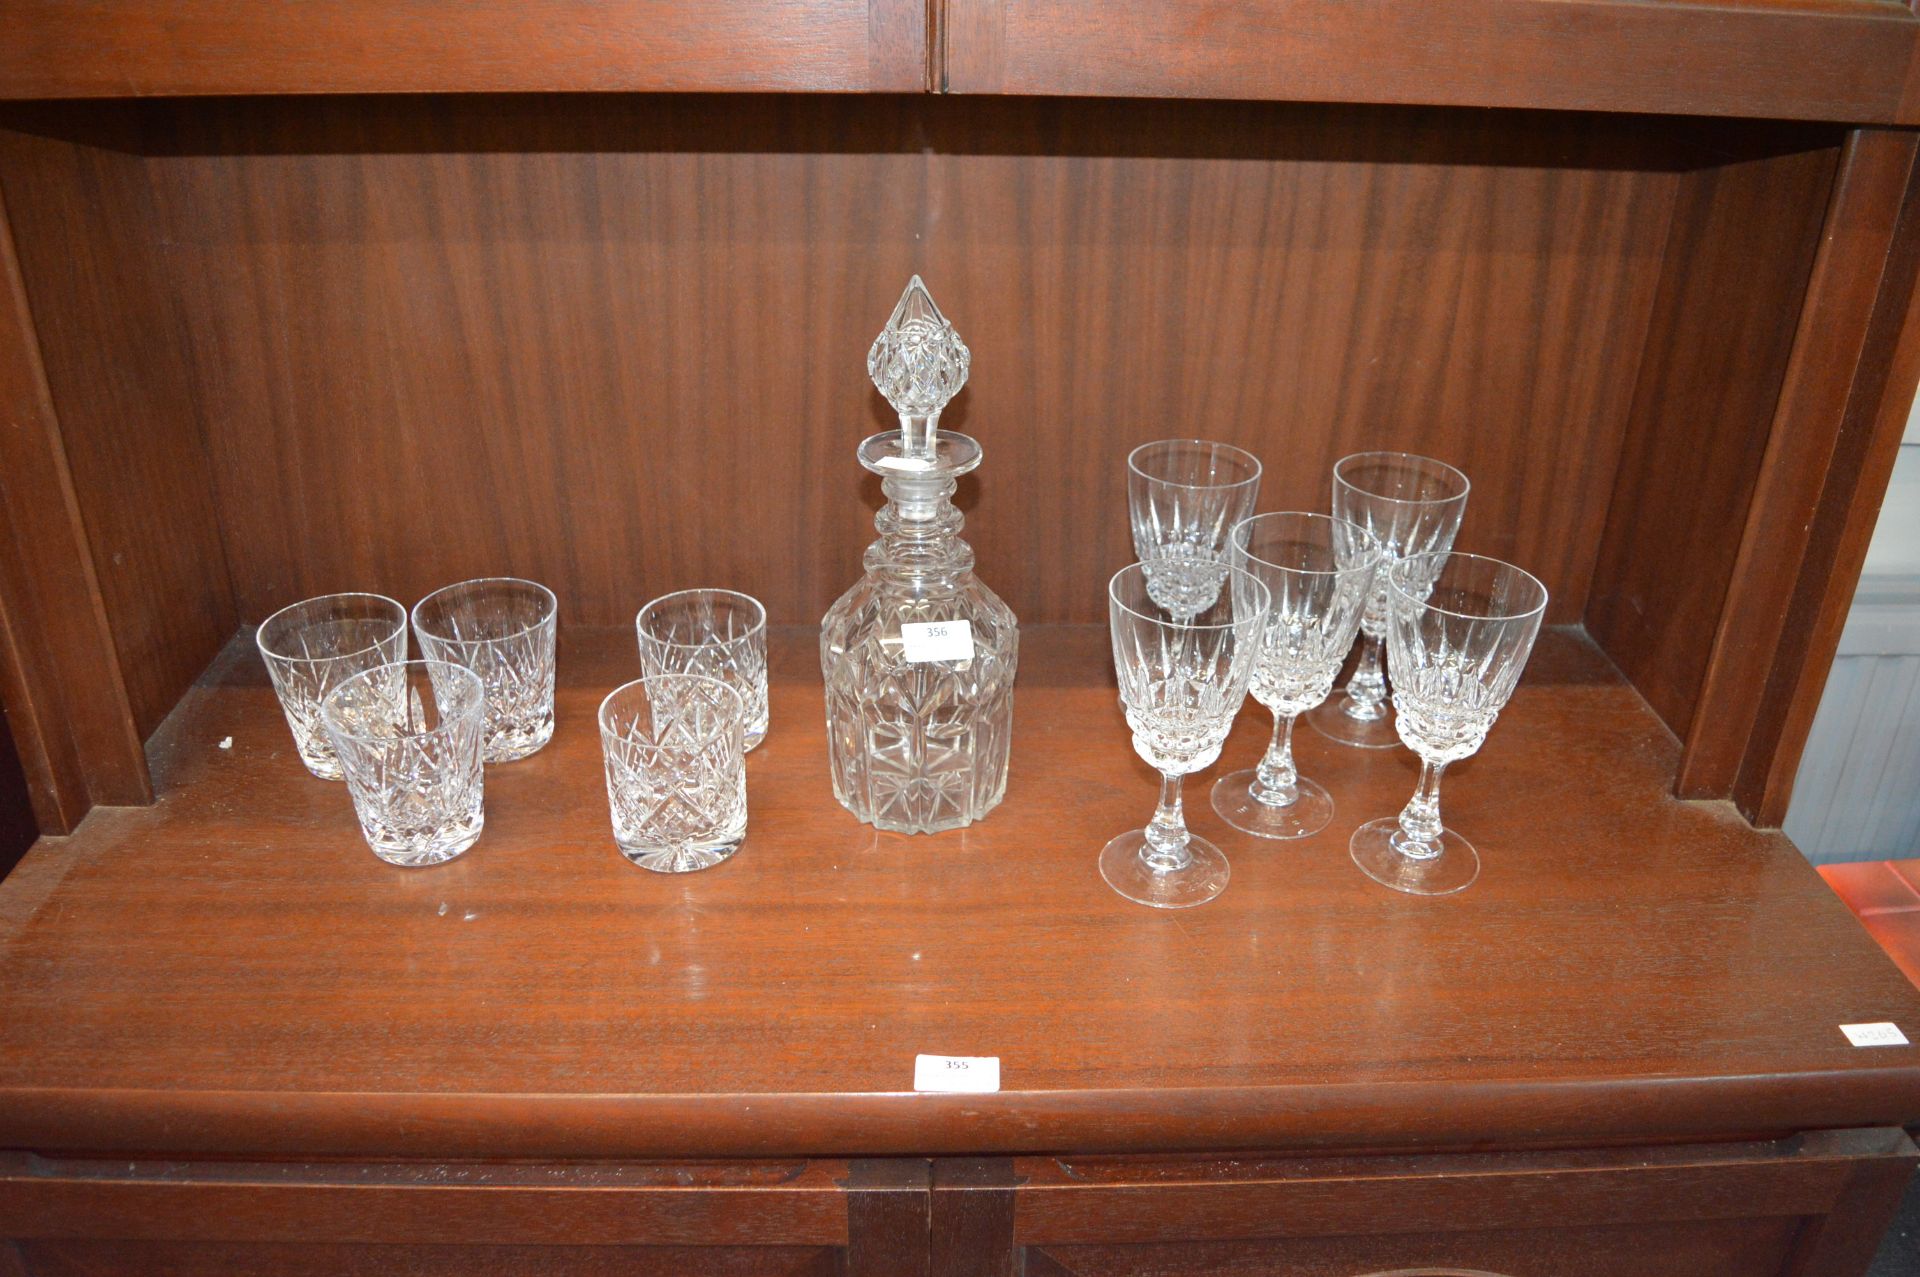 Cut Glass Lead Crystal Decanter plus Tumblers, and Wine Glasses